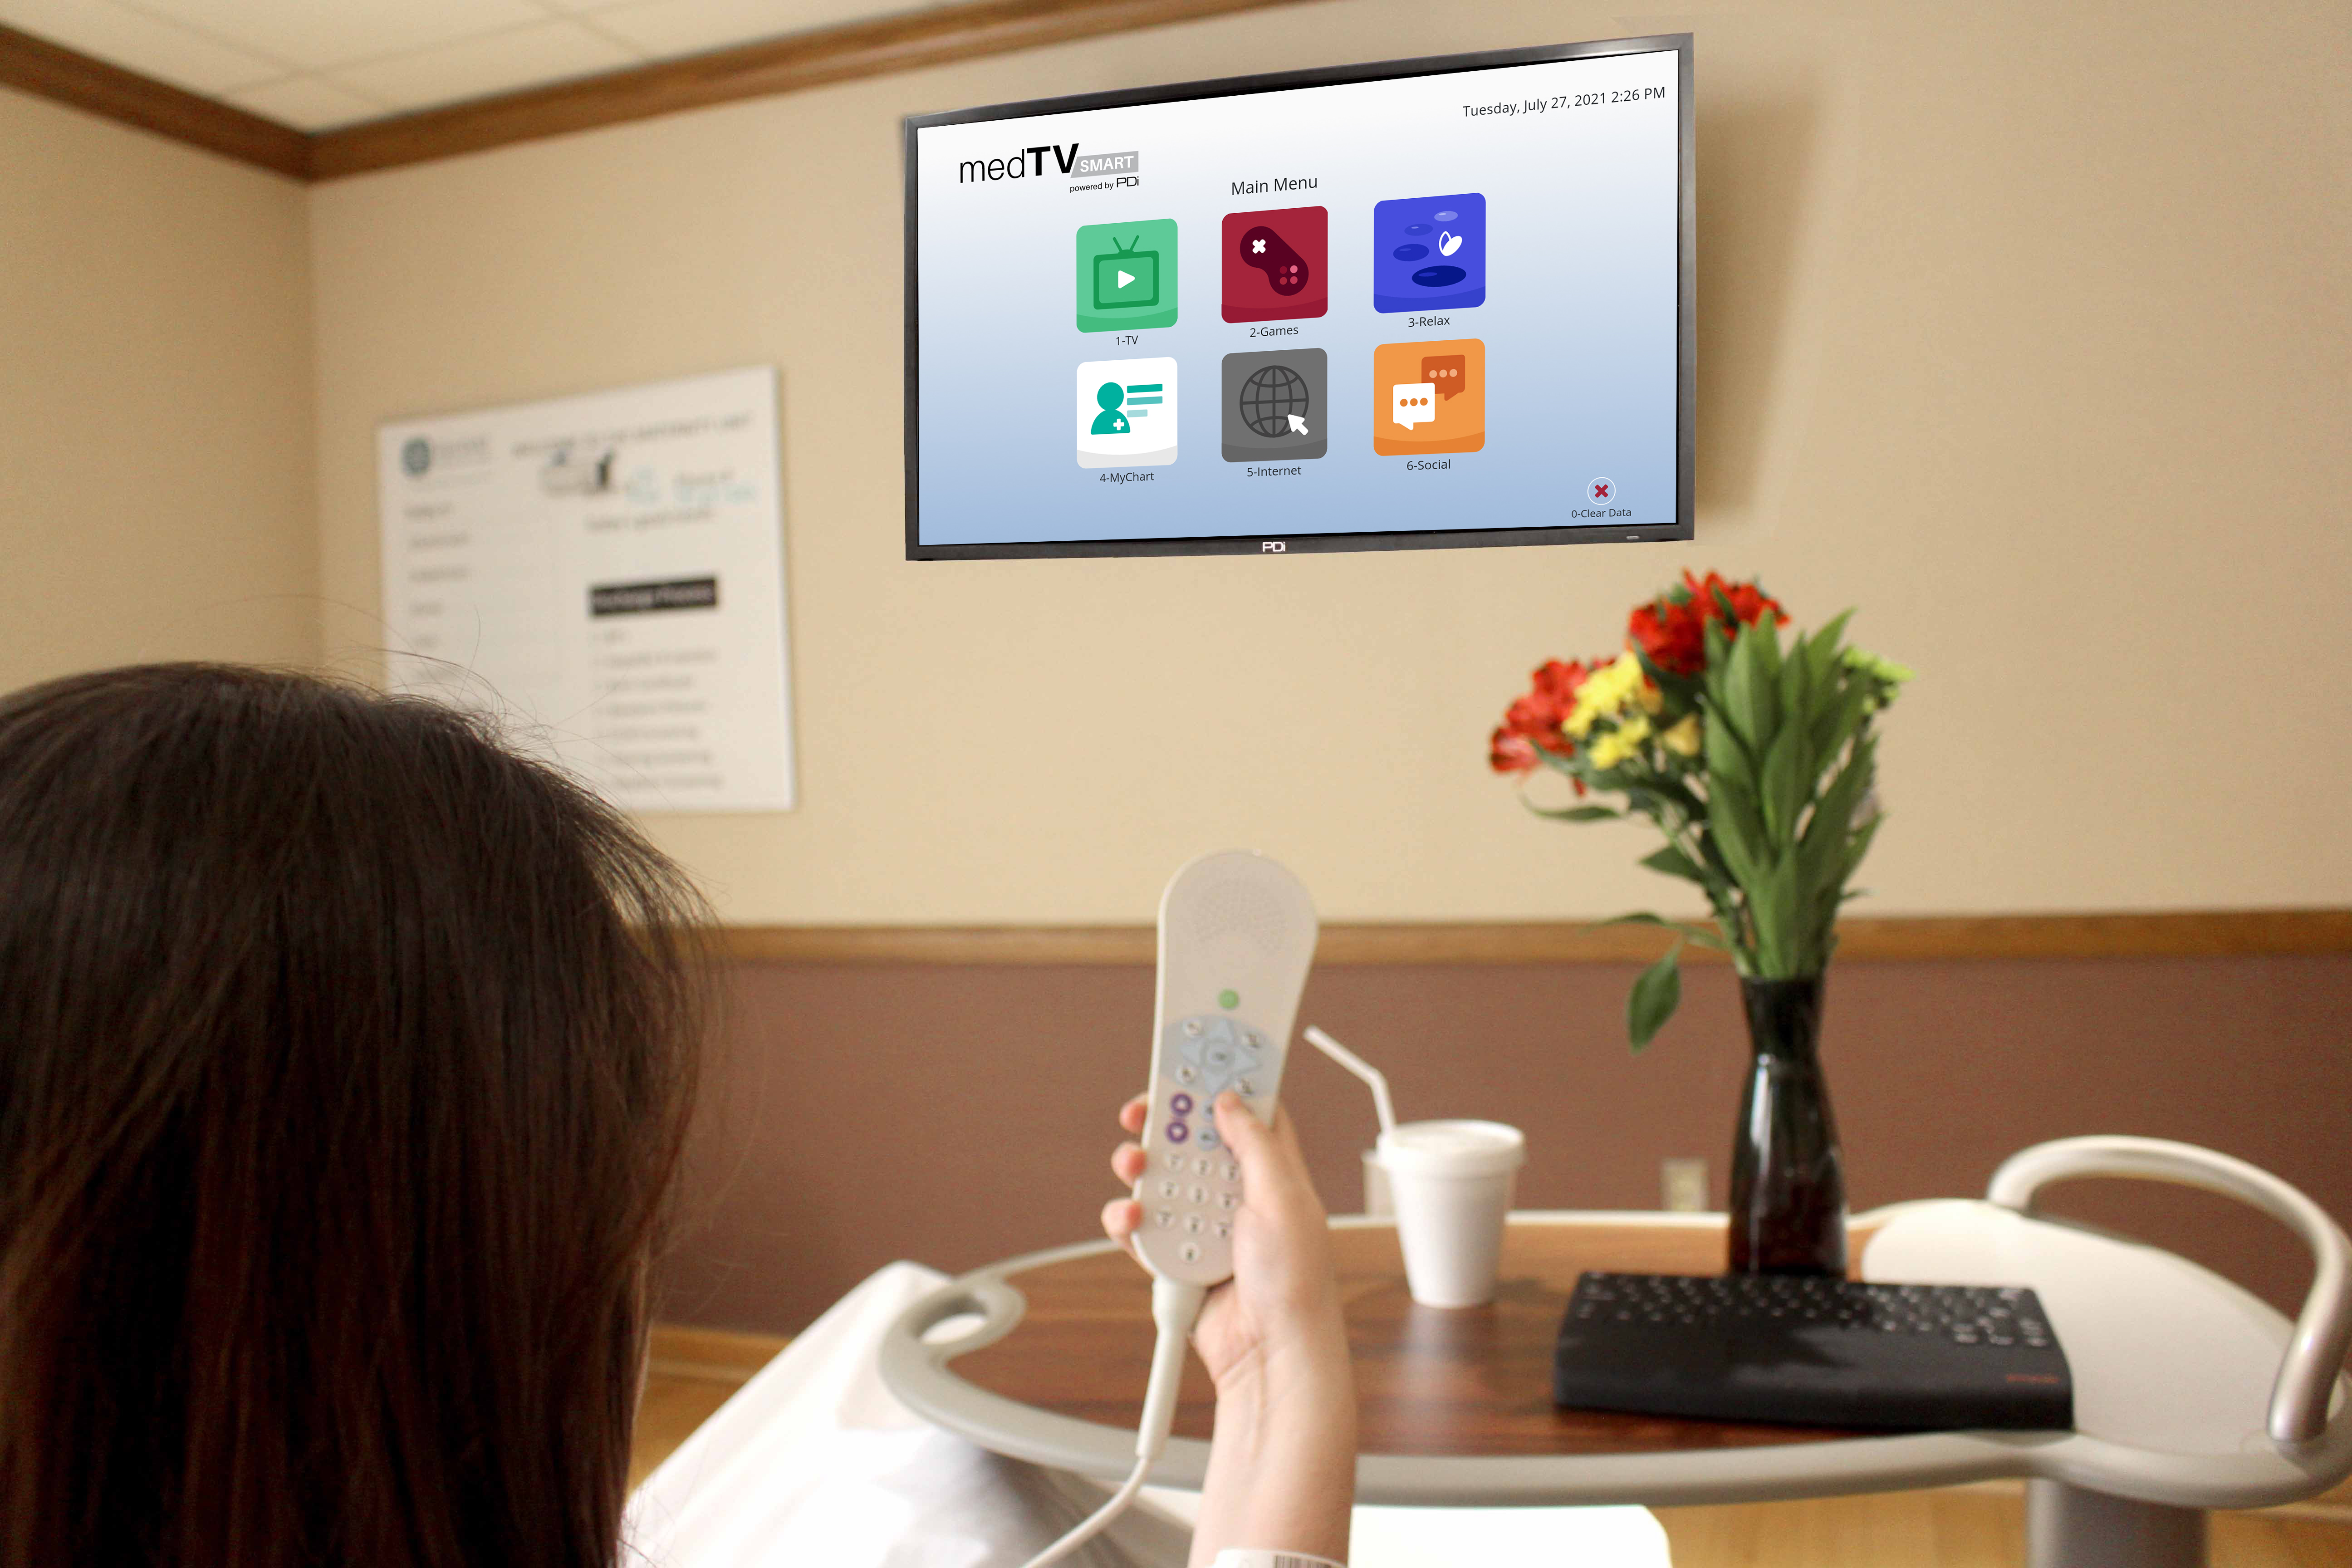 Patient Centered Care includes Smart TV Technology